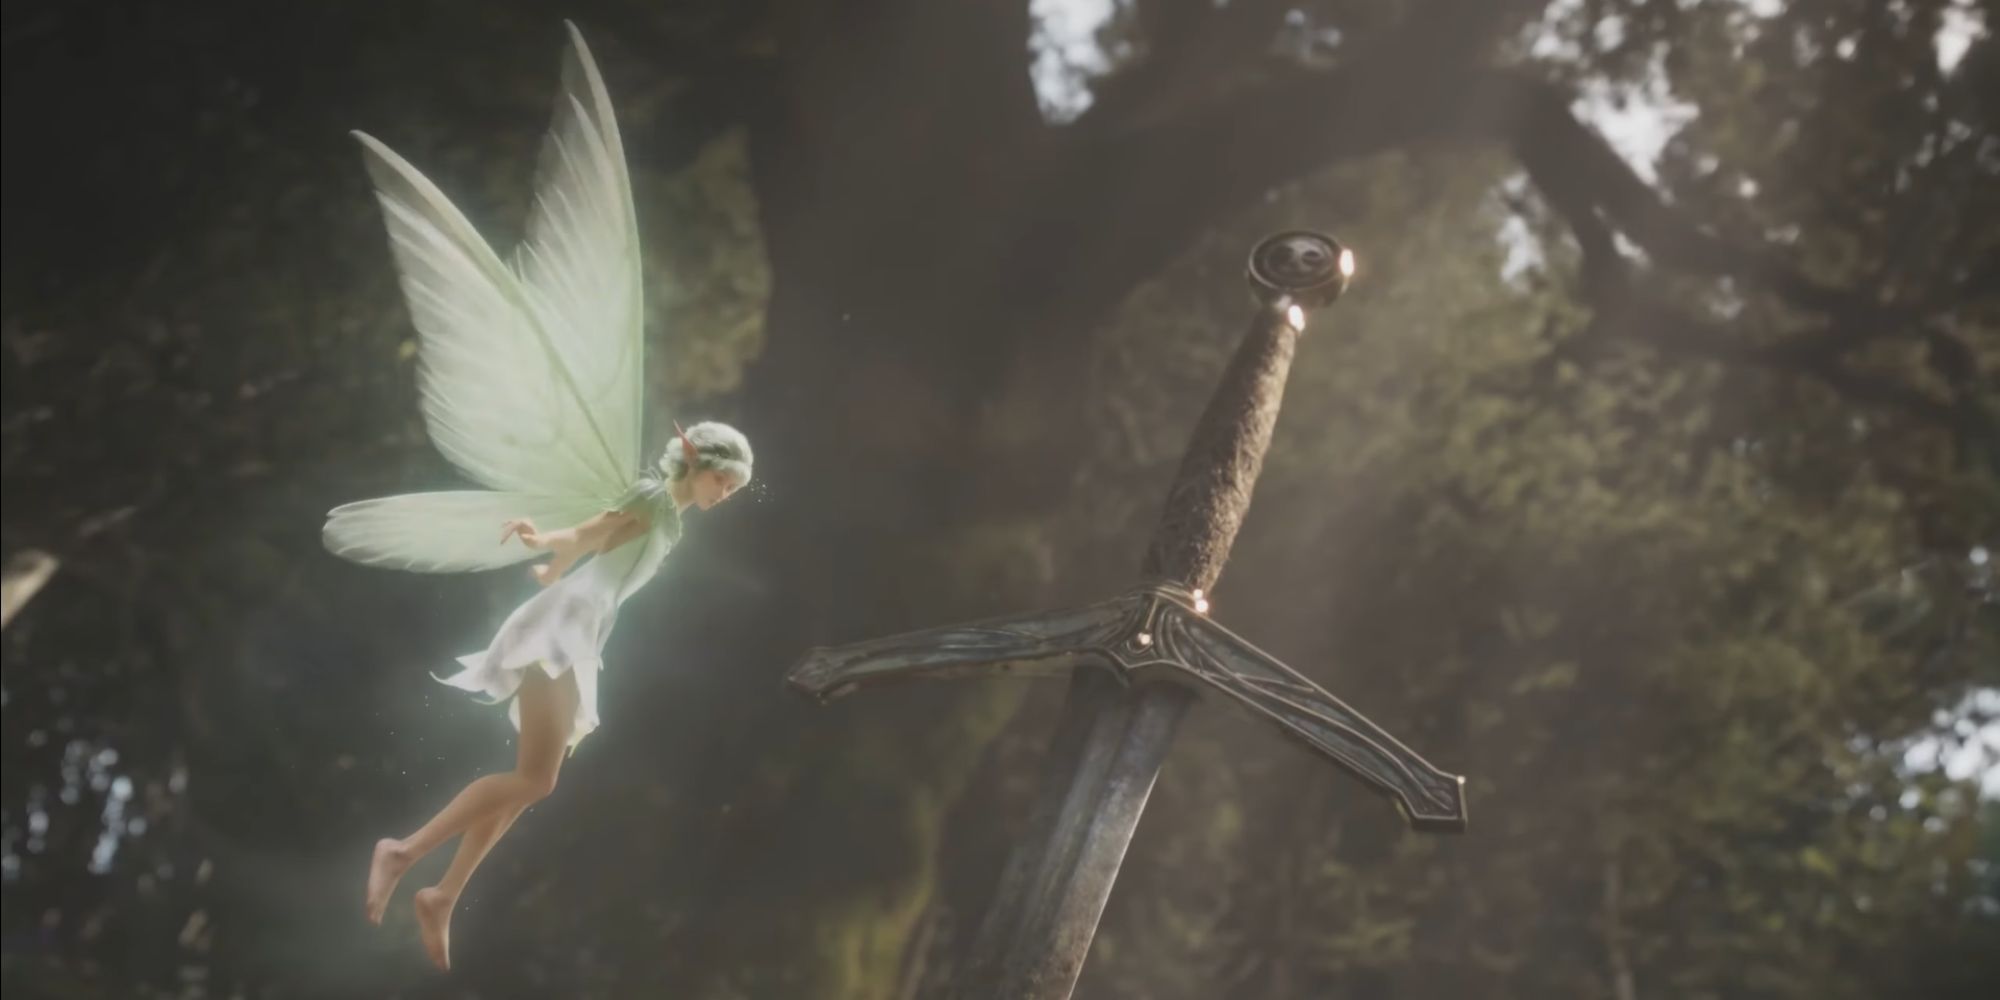 Fable Fans Lose Hope Of Getting A New Trailer At The Xbox Games Showcase